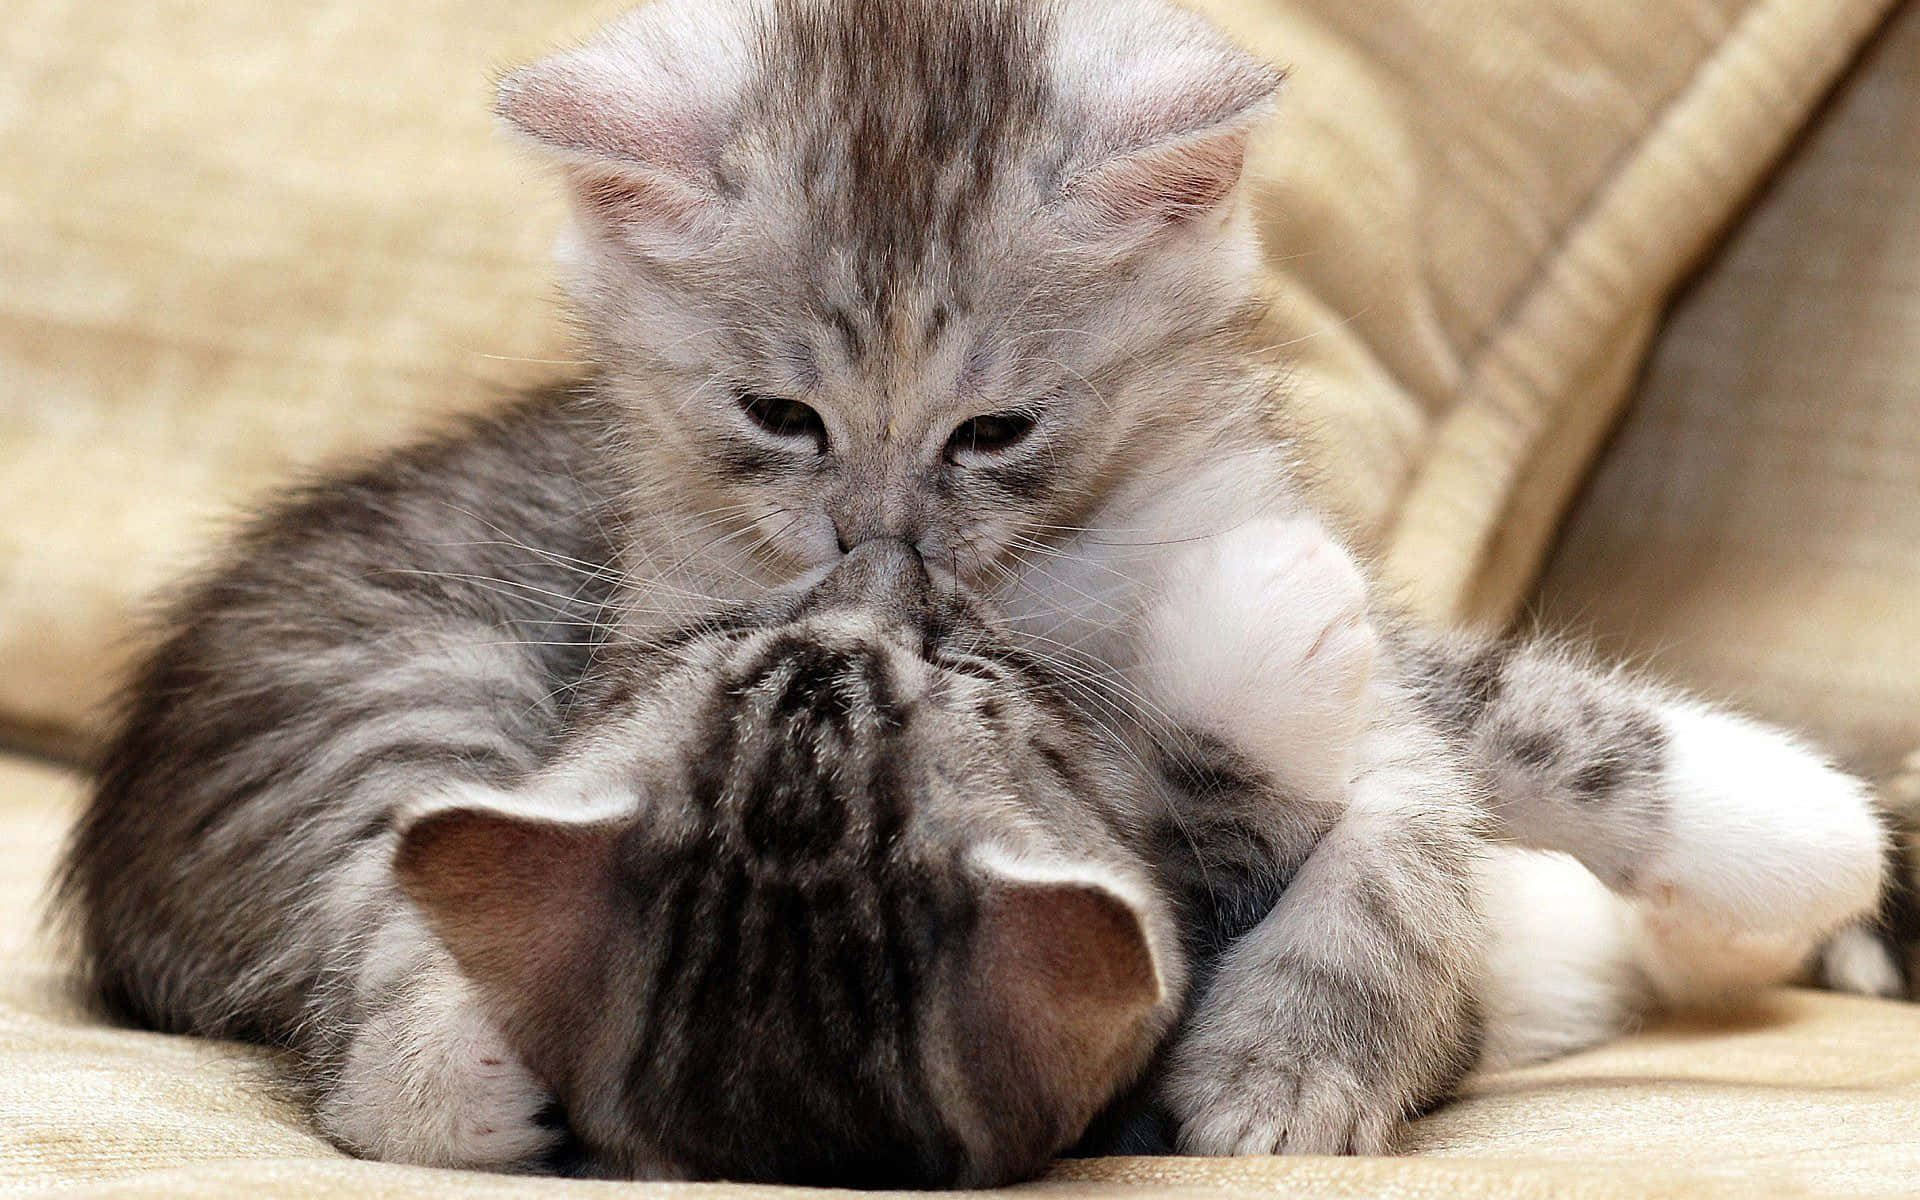 A Kitten Is Playing With Another Kitten